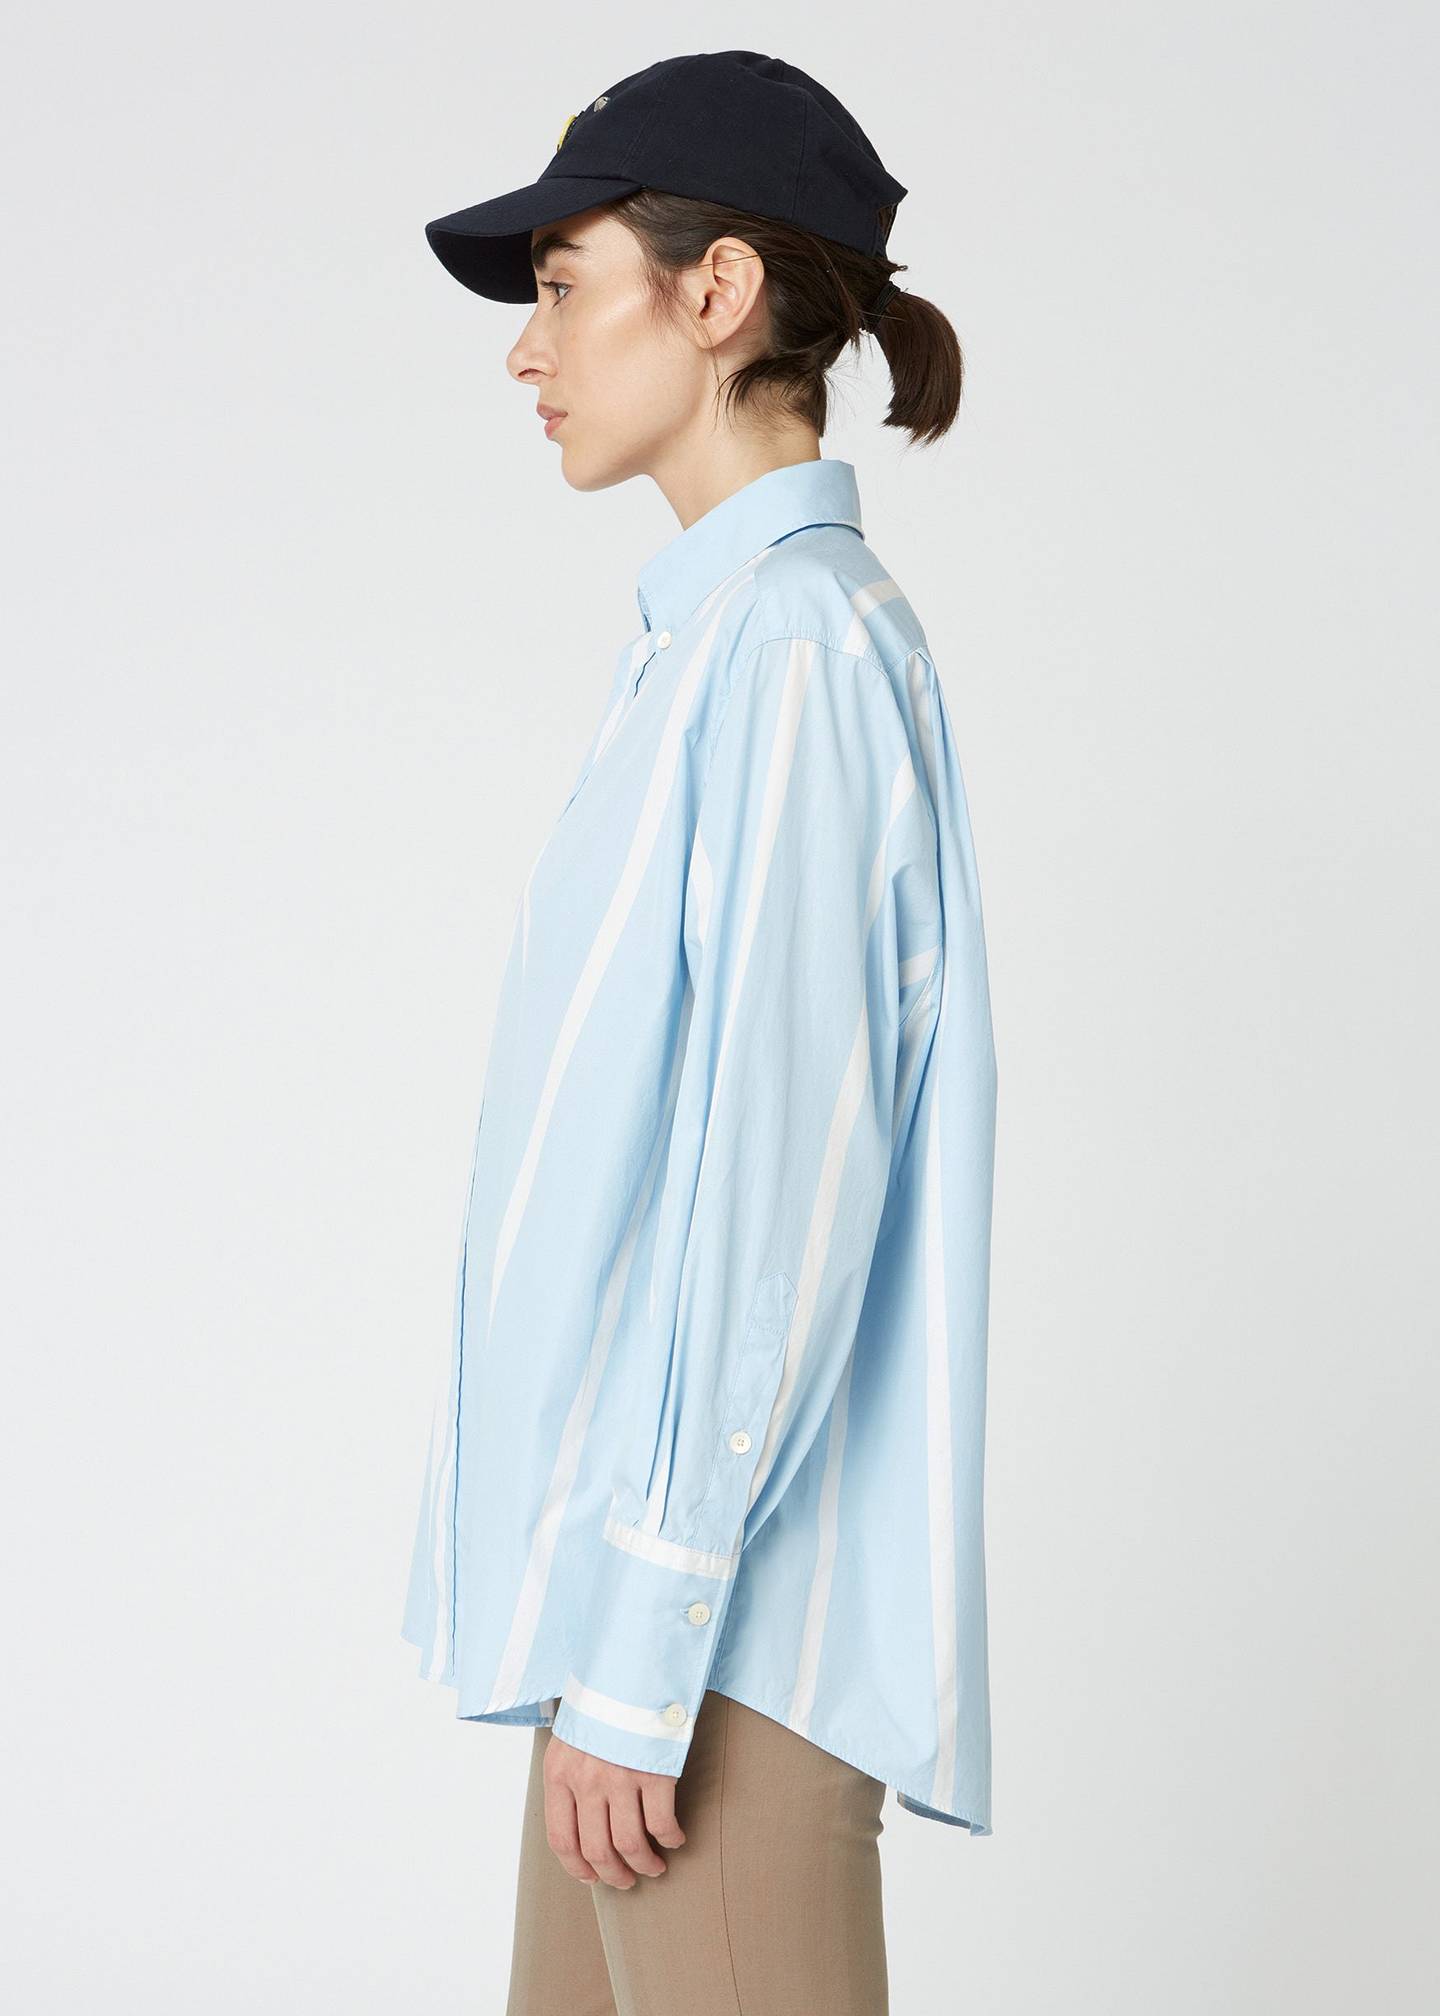 OVERSIZED SHIRT WITH WIDE BLUE STRIPES BY HOPE